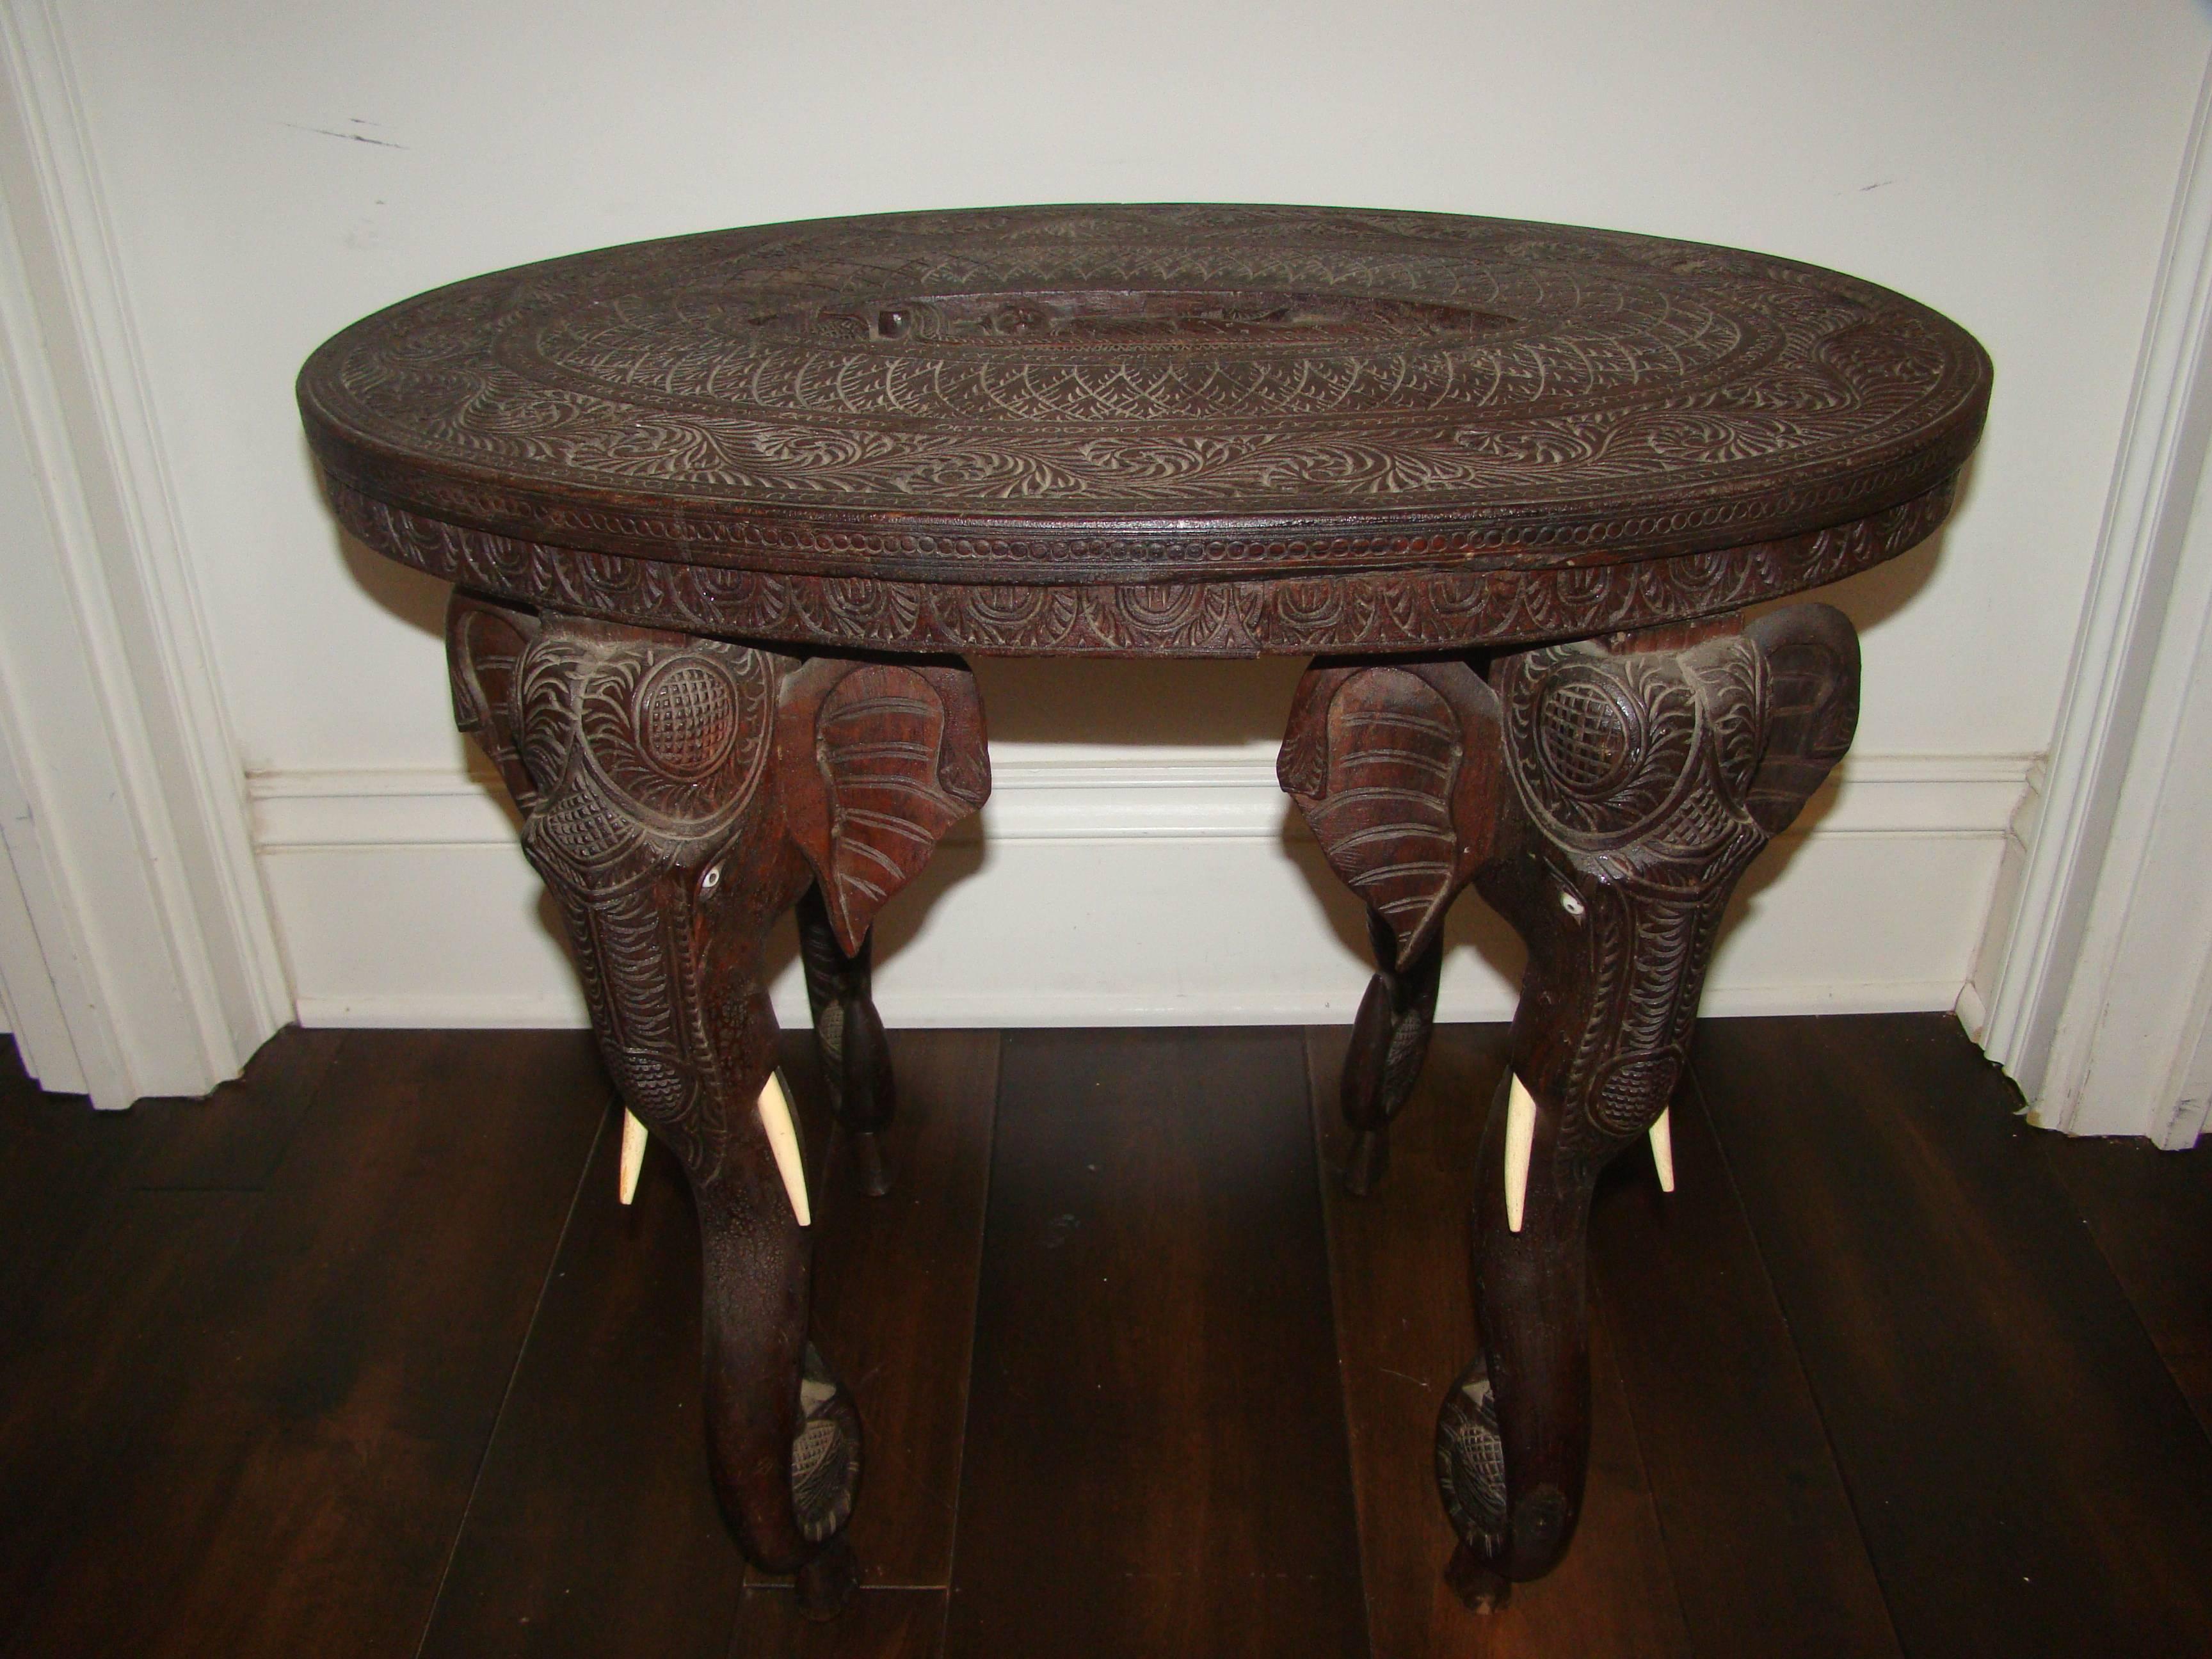 Exceptional carved rosewood Anglo Raj Indian occasional table. This amazing intricate hand-carved table depicts four elephant heads, one on each corner with faux ivory tusks and eyes. The top depicts a Buddhist theme. Truly a special and hard to